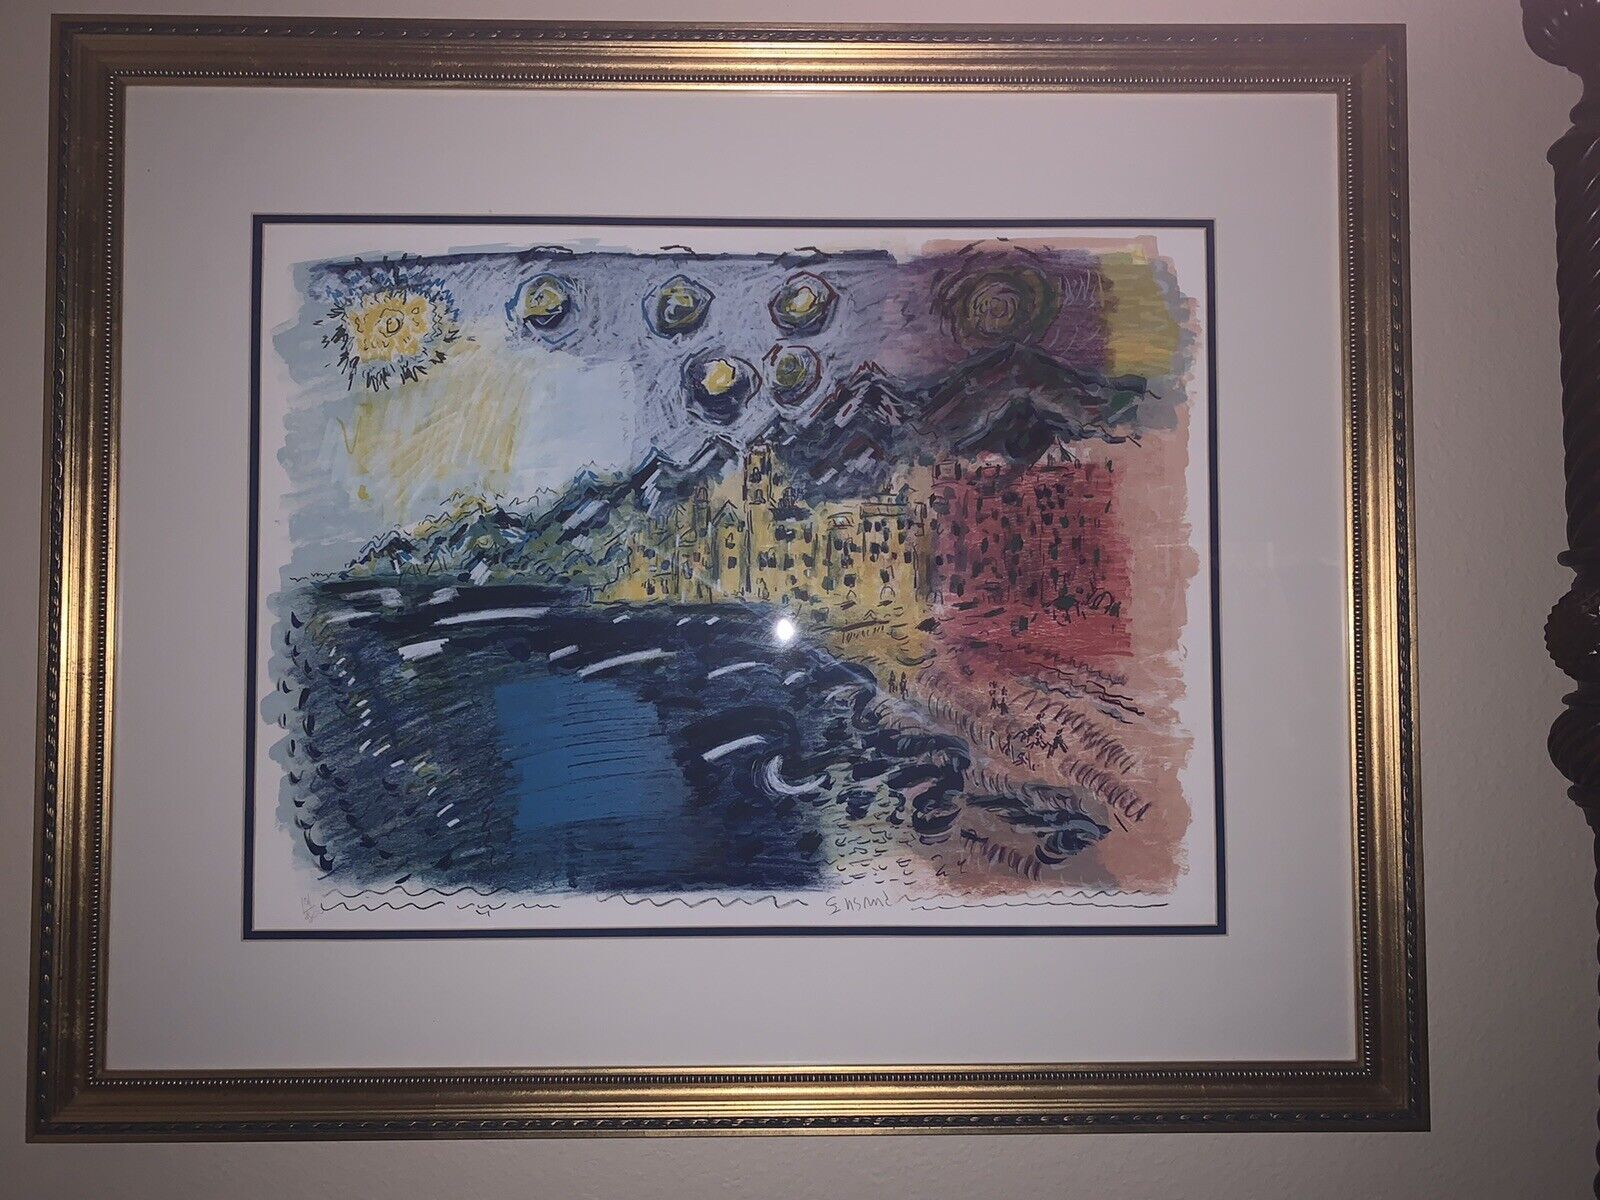 Wayne Ensrud Lithograph “Comagli Italy” Hand Signed, Numbered. Beautiful Frame